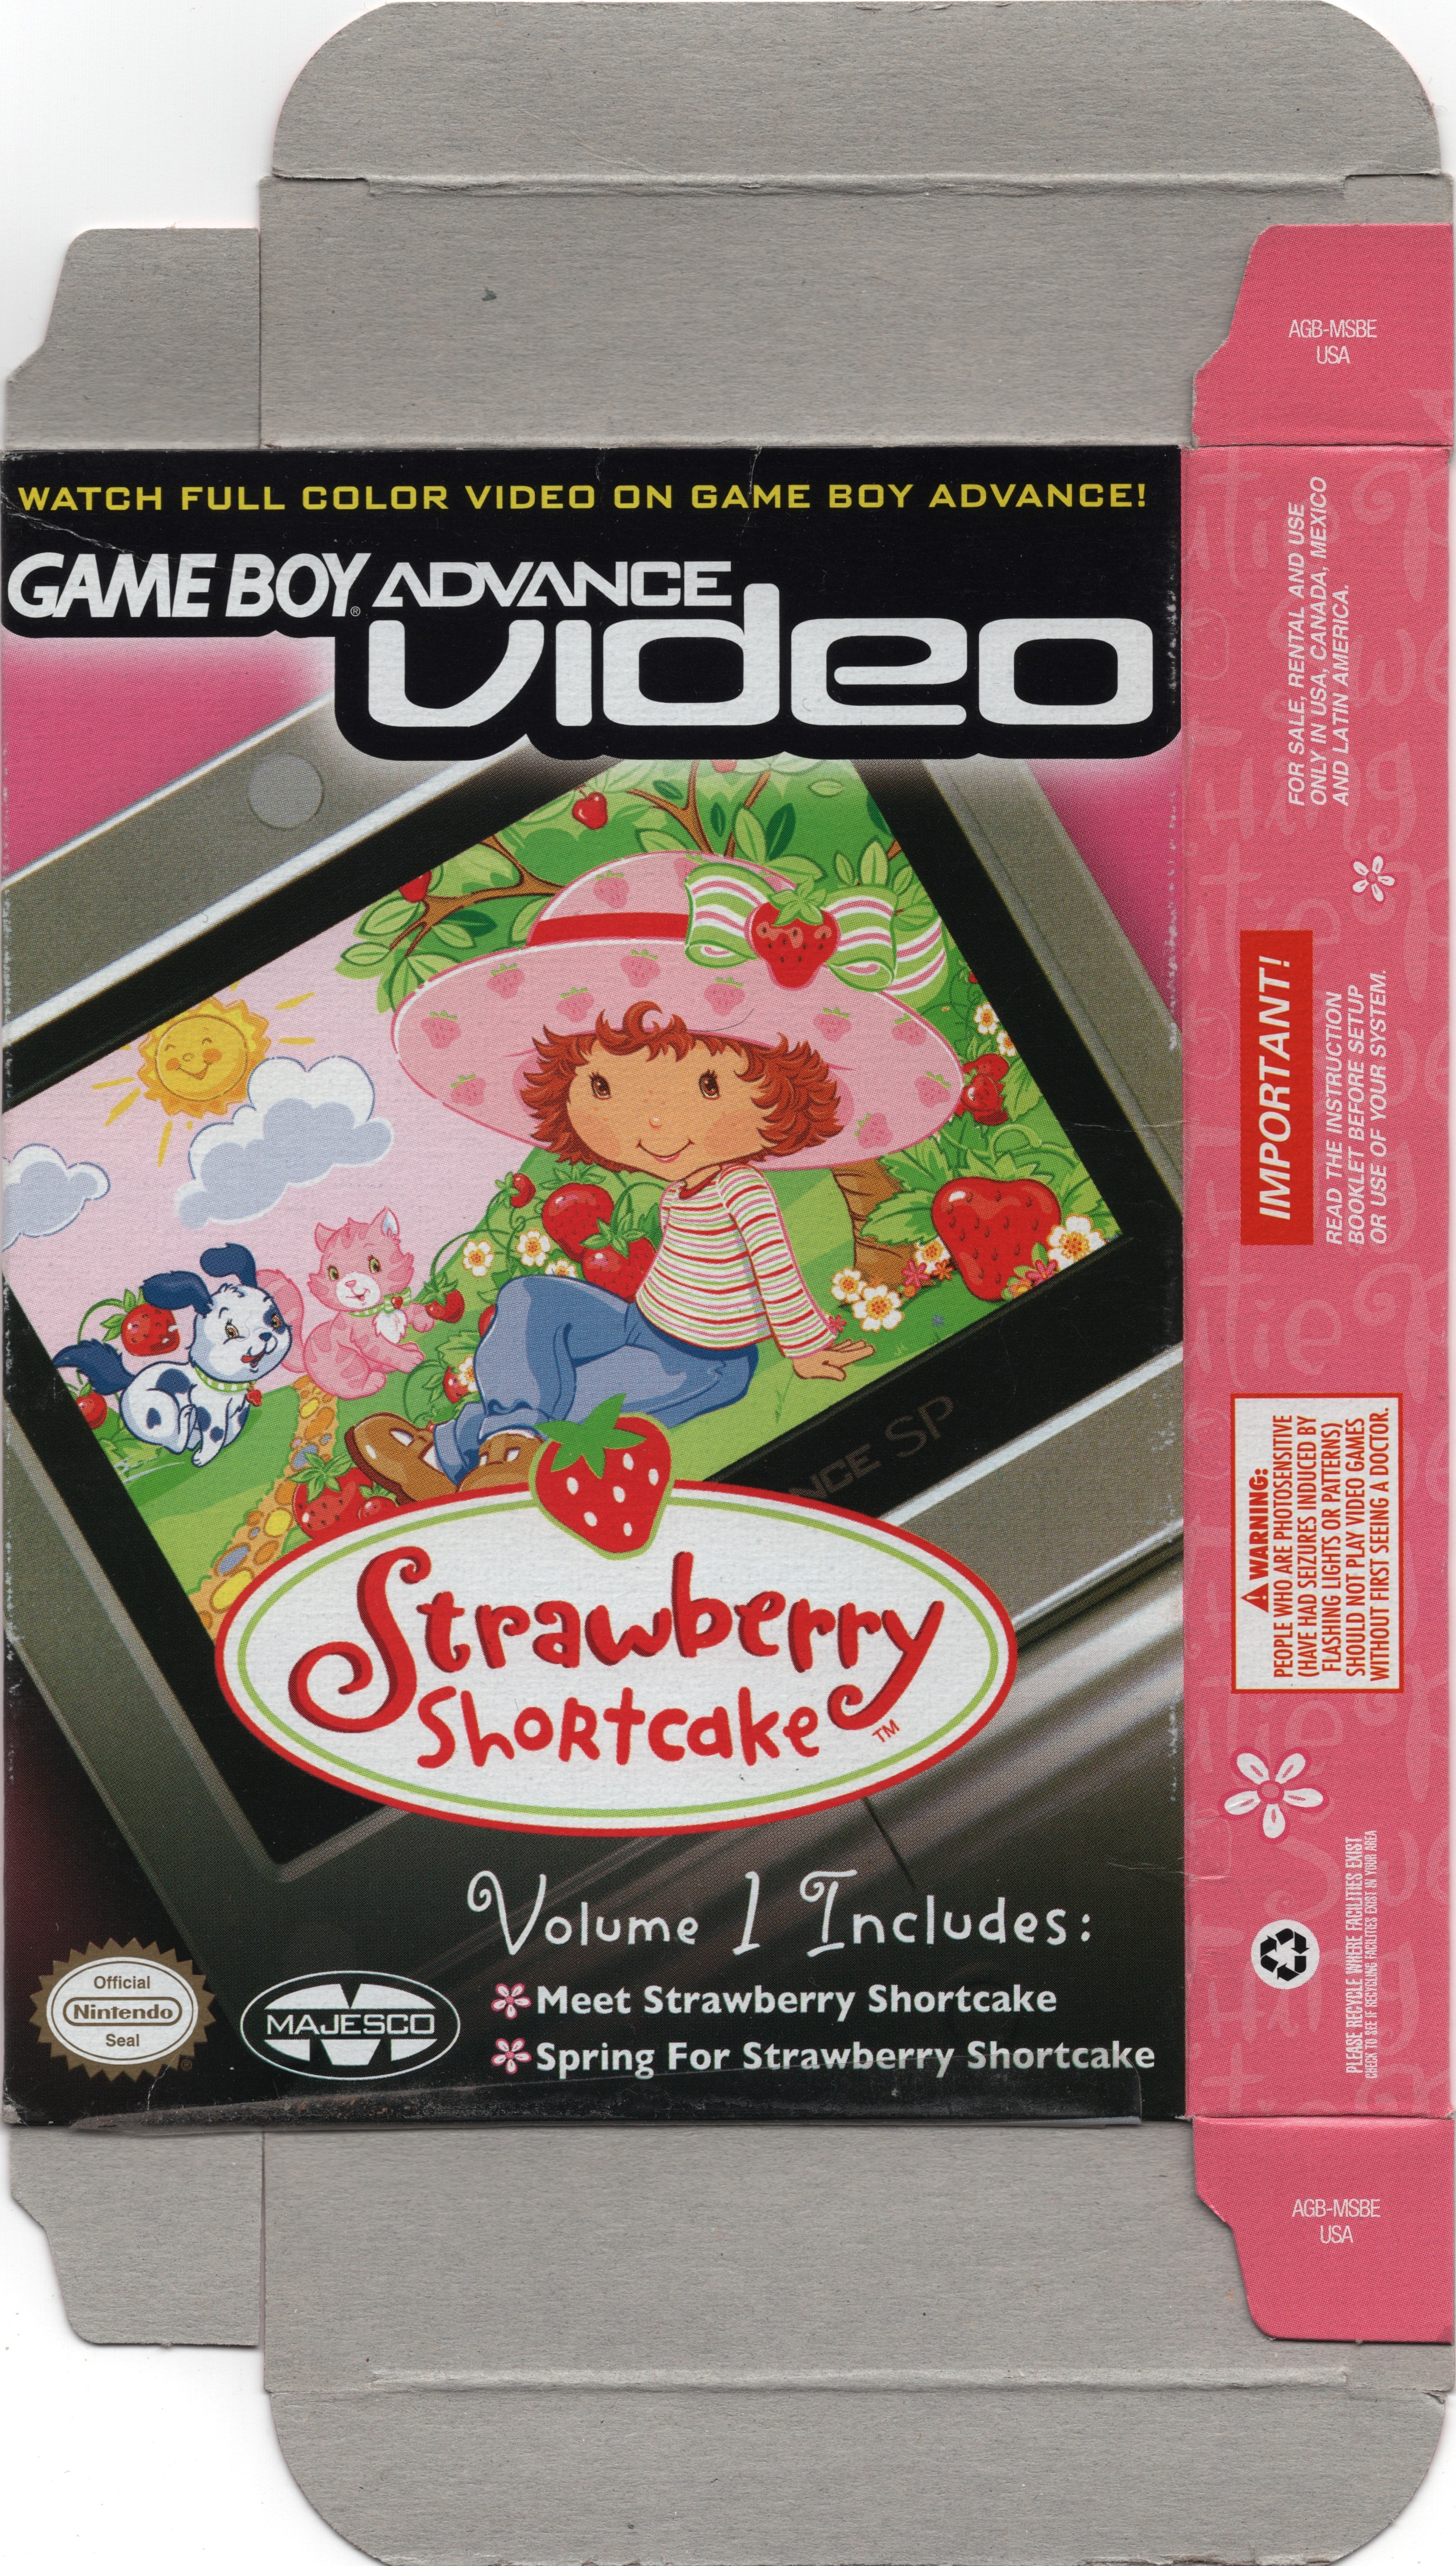 Strawberry Shortcake - Volume 1 [AGB-MSBE USA] Box Scan : Majesco : Free  Download, Borrow, and Streaming : Internet Archive